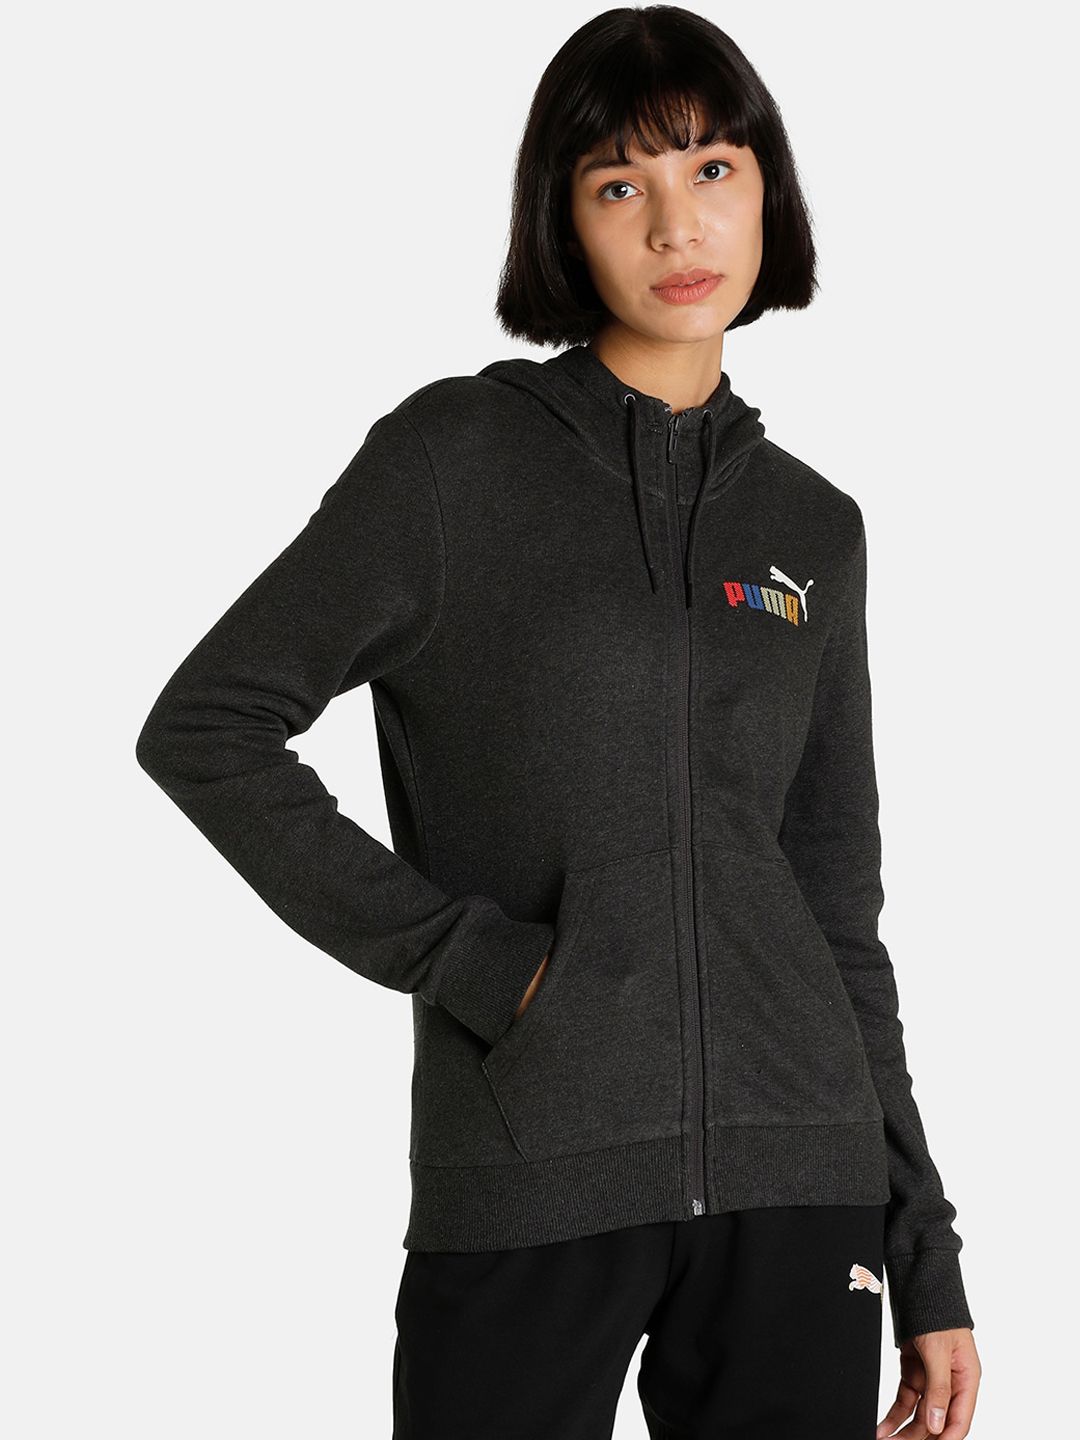 Puma Women Grey Solid Jackets Price in India